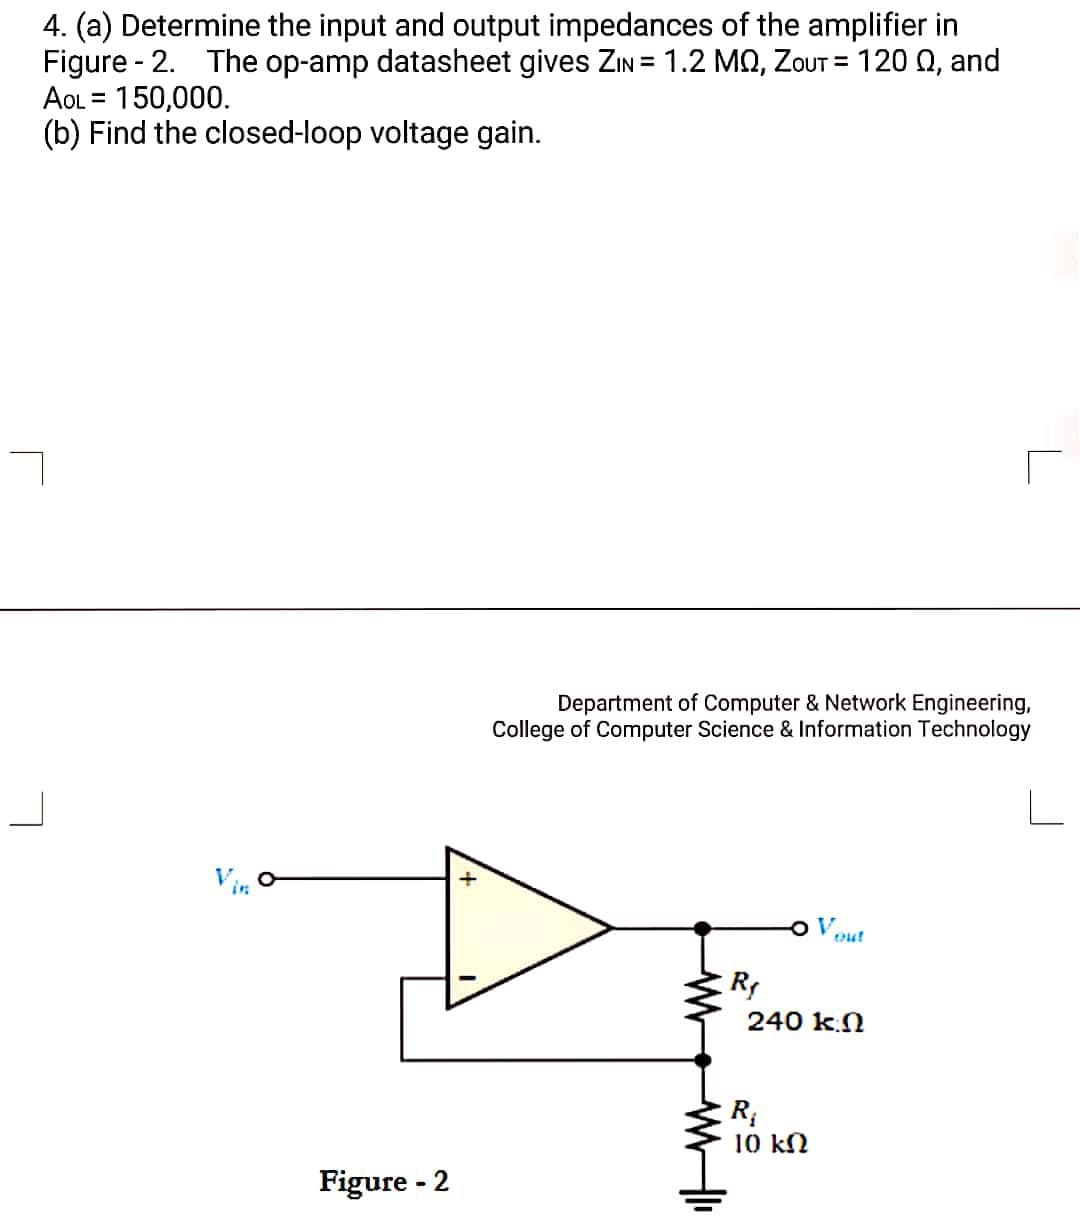 4. (a) Determine the input and output impedances of the amplifier in
Figure - 2. The op-amp datasheet gives ZIN = 1.2 MQ, ZoUT = 120 Q, and
AOL = 150,000.
(b) Find the closed-loop voltage gain.
Department of Computer & Network Engineering,
College of Computer Science & Information Technology
Vin
Vout
R
240 k.N
R;
10 kN
Figure - 2
